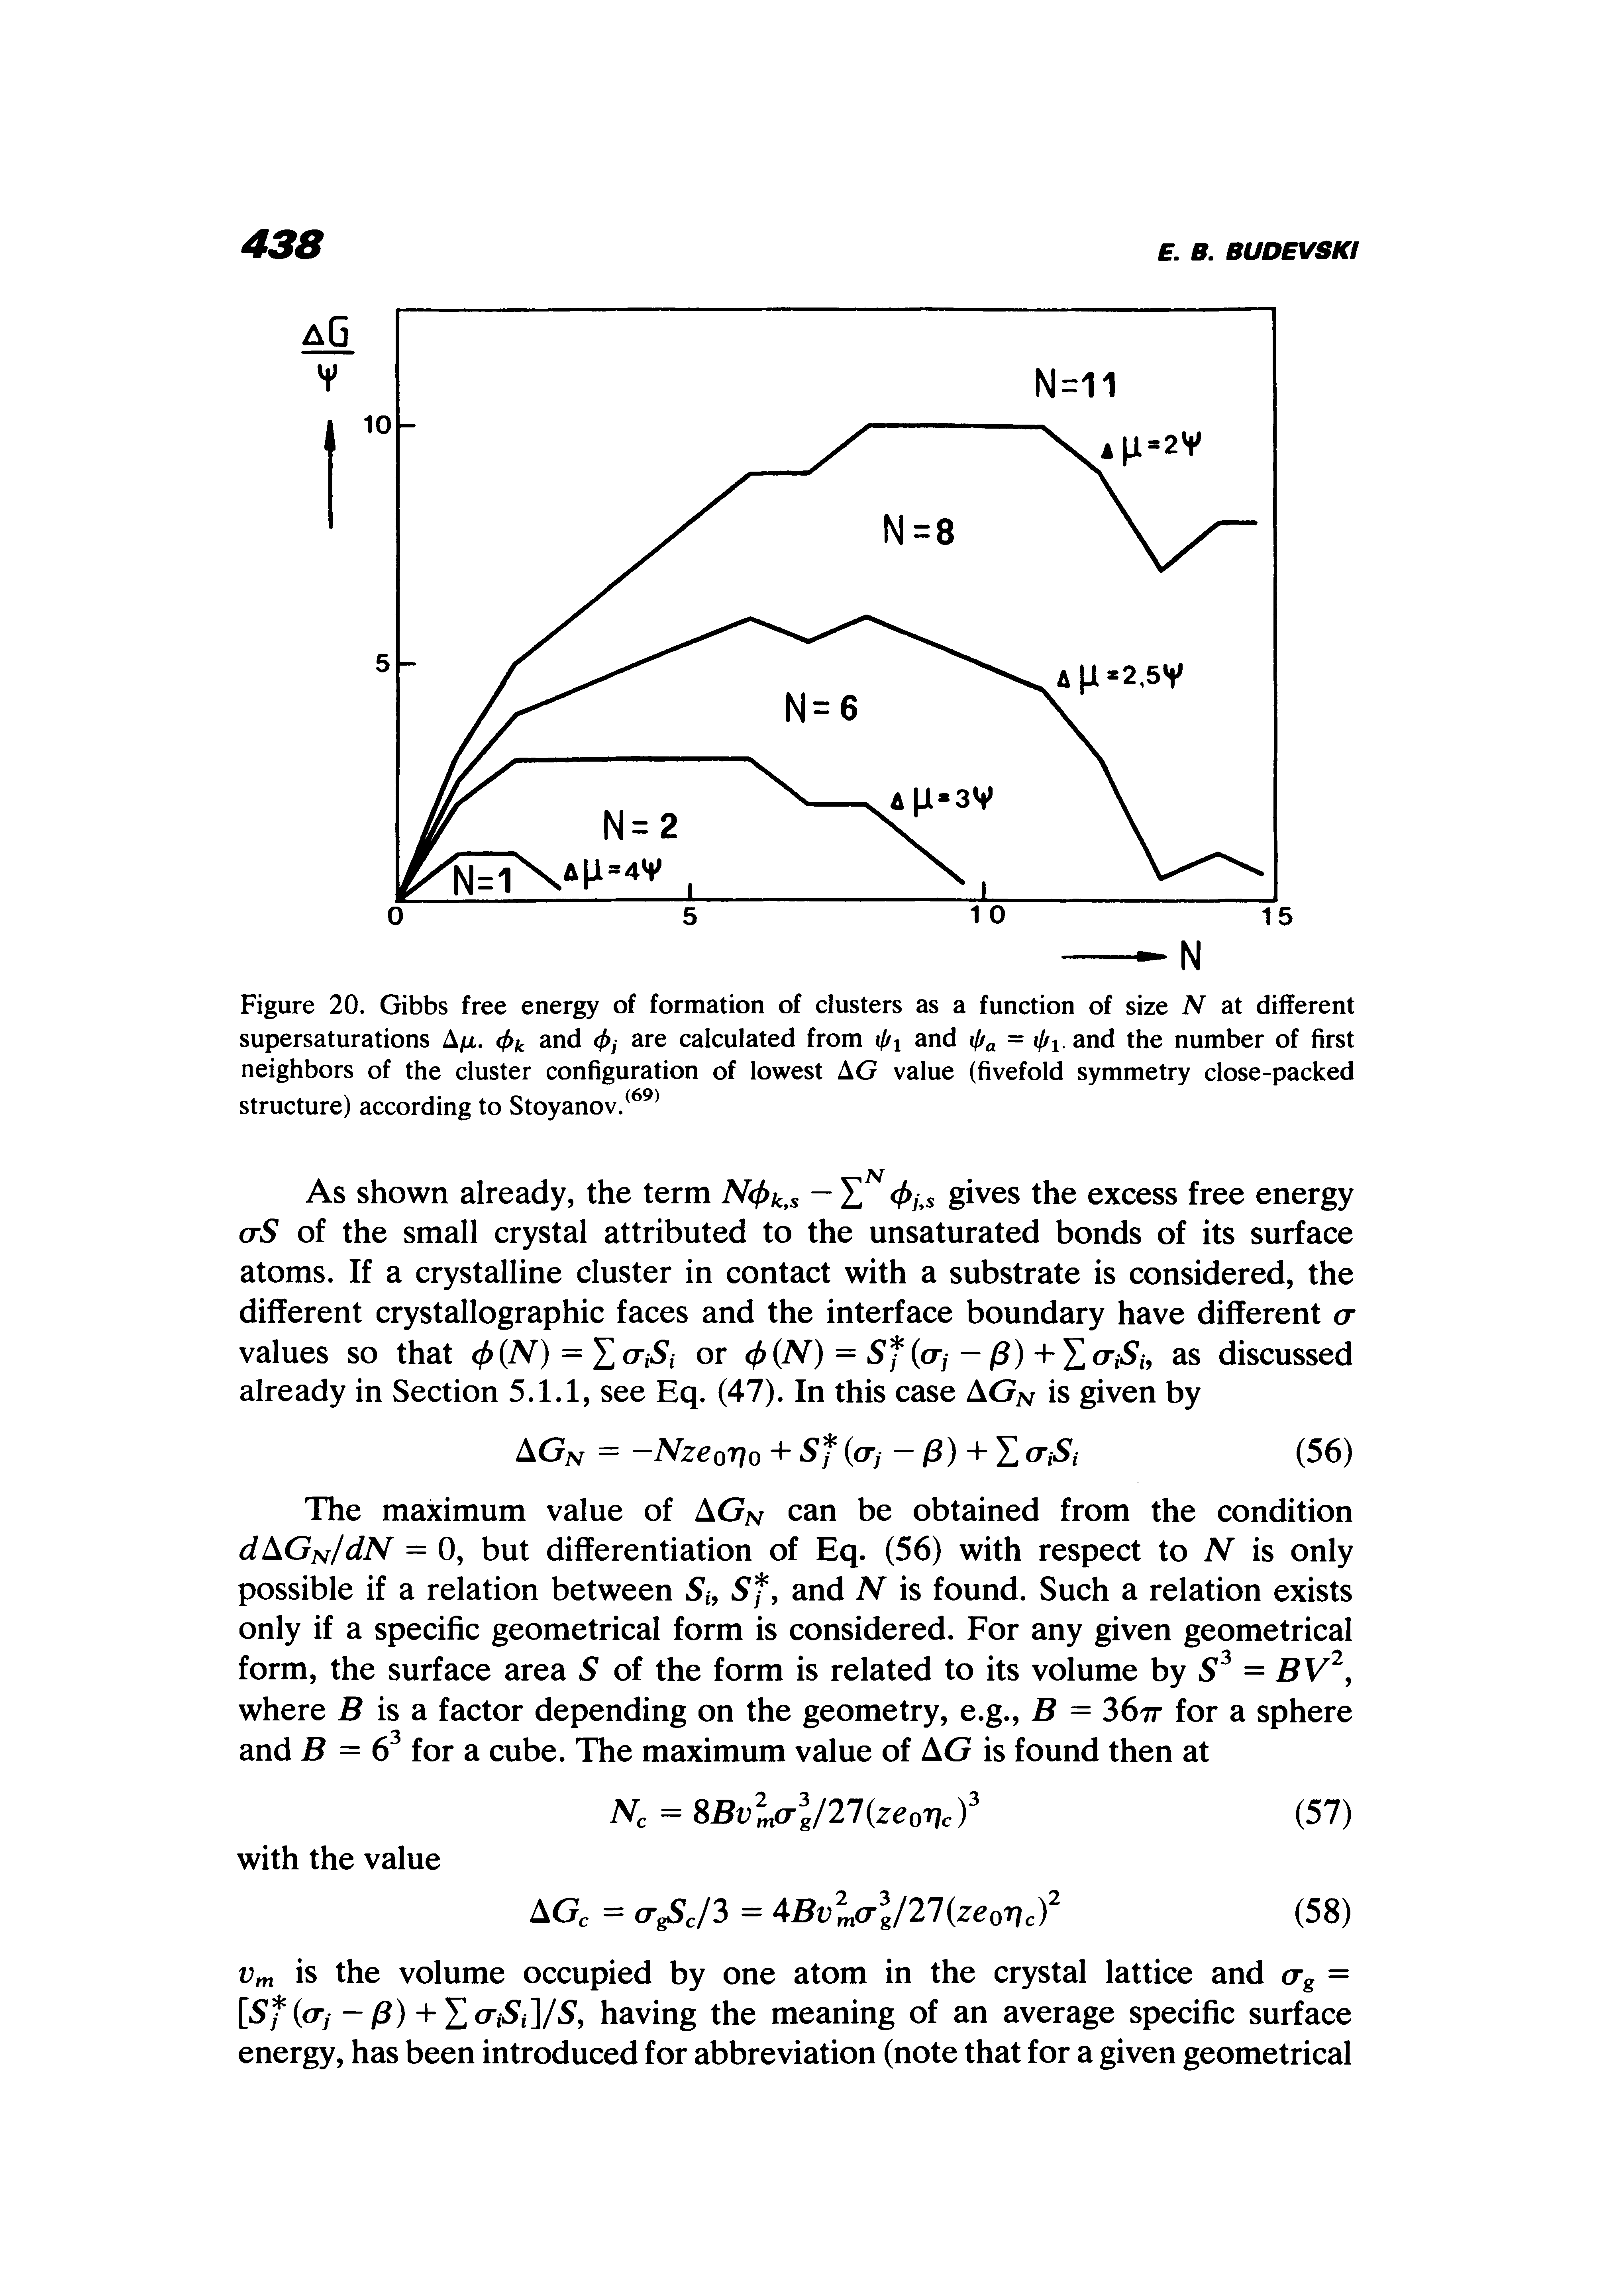 Figure 20. Gibbs free energy of formation of clusters as a function of size N at different supersaturations A/u. <f>k and <f>j are calculated from il/i and iff a = lAi and the number of first neighbors of the cluster configuration of lowest AG value (fivefold symmetry close-packed structure) according to Stoyanov. ...